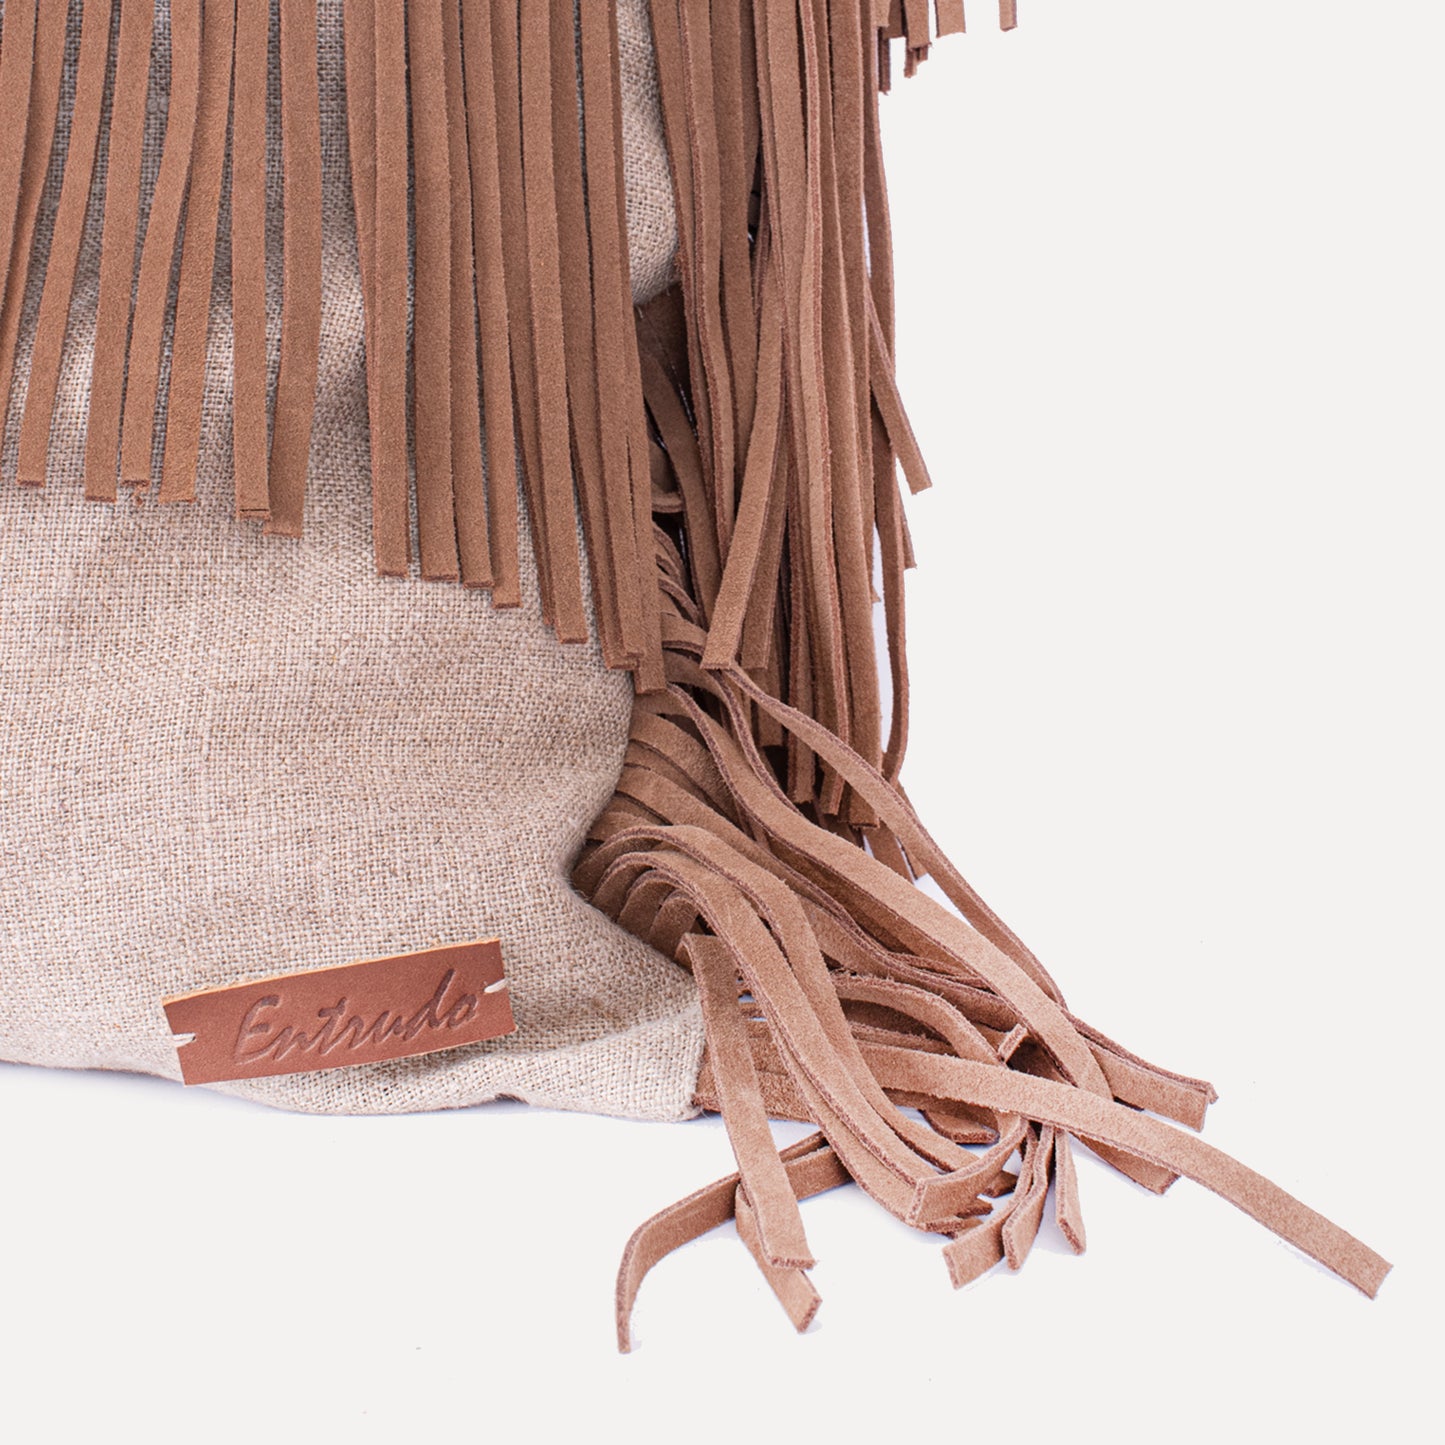 Podence - cushion with leather fringes in chocolate brown